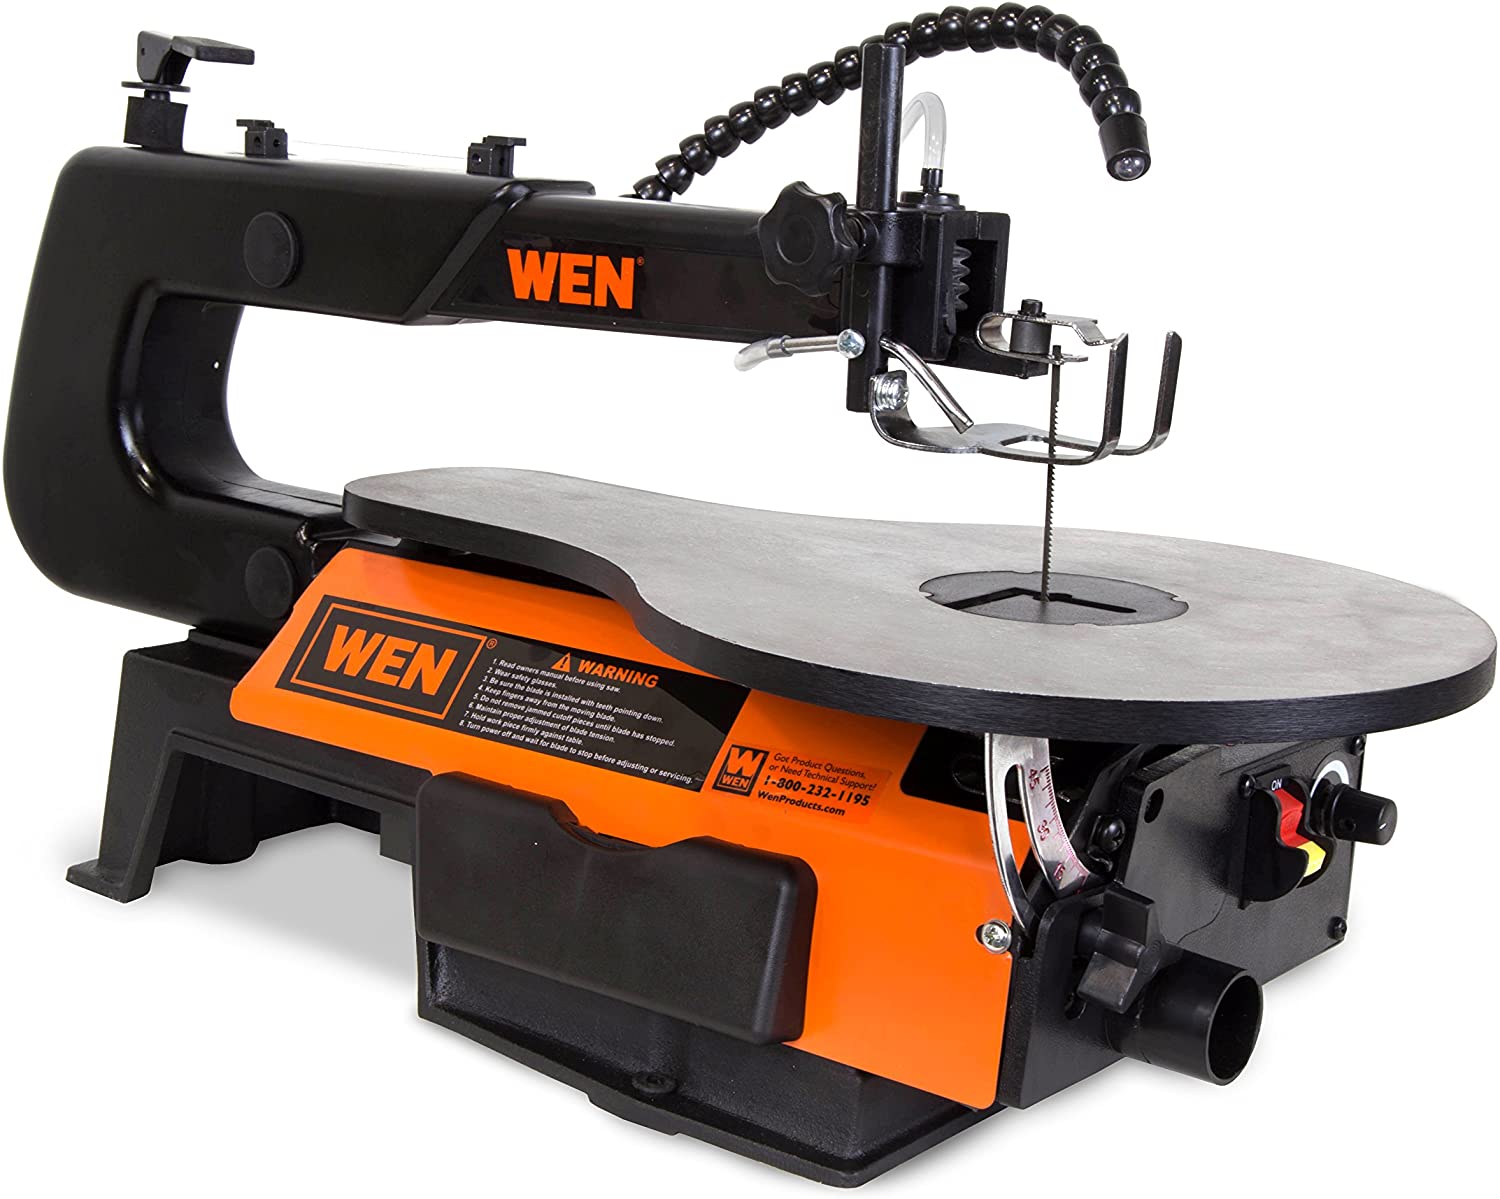 WEN 3921 16-Inch Two-Direction Variable Speed Scroll Saw